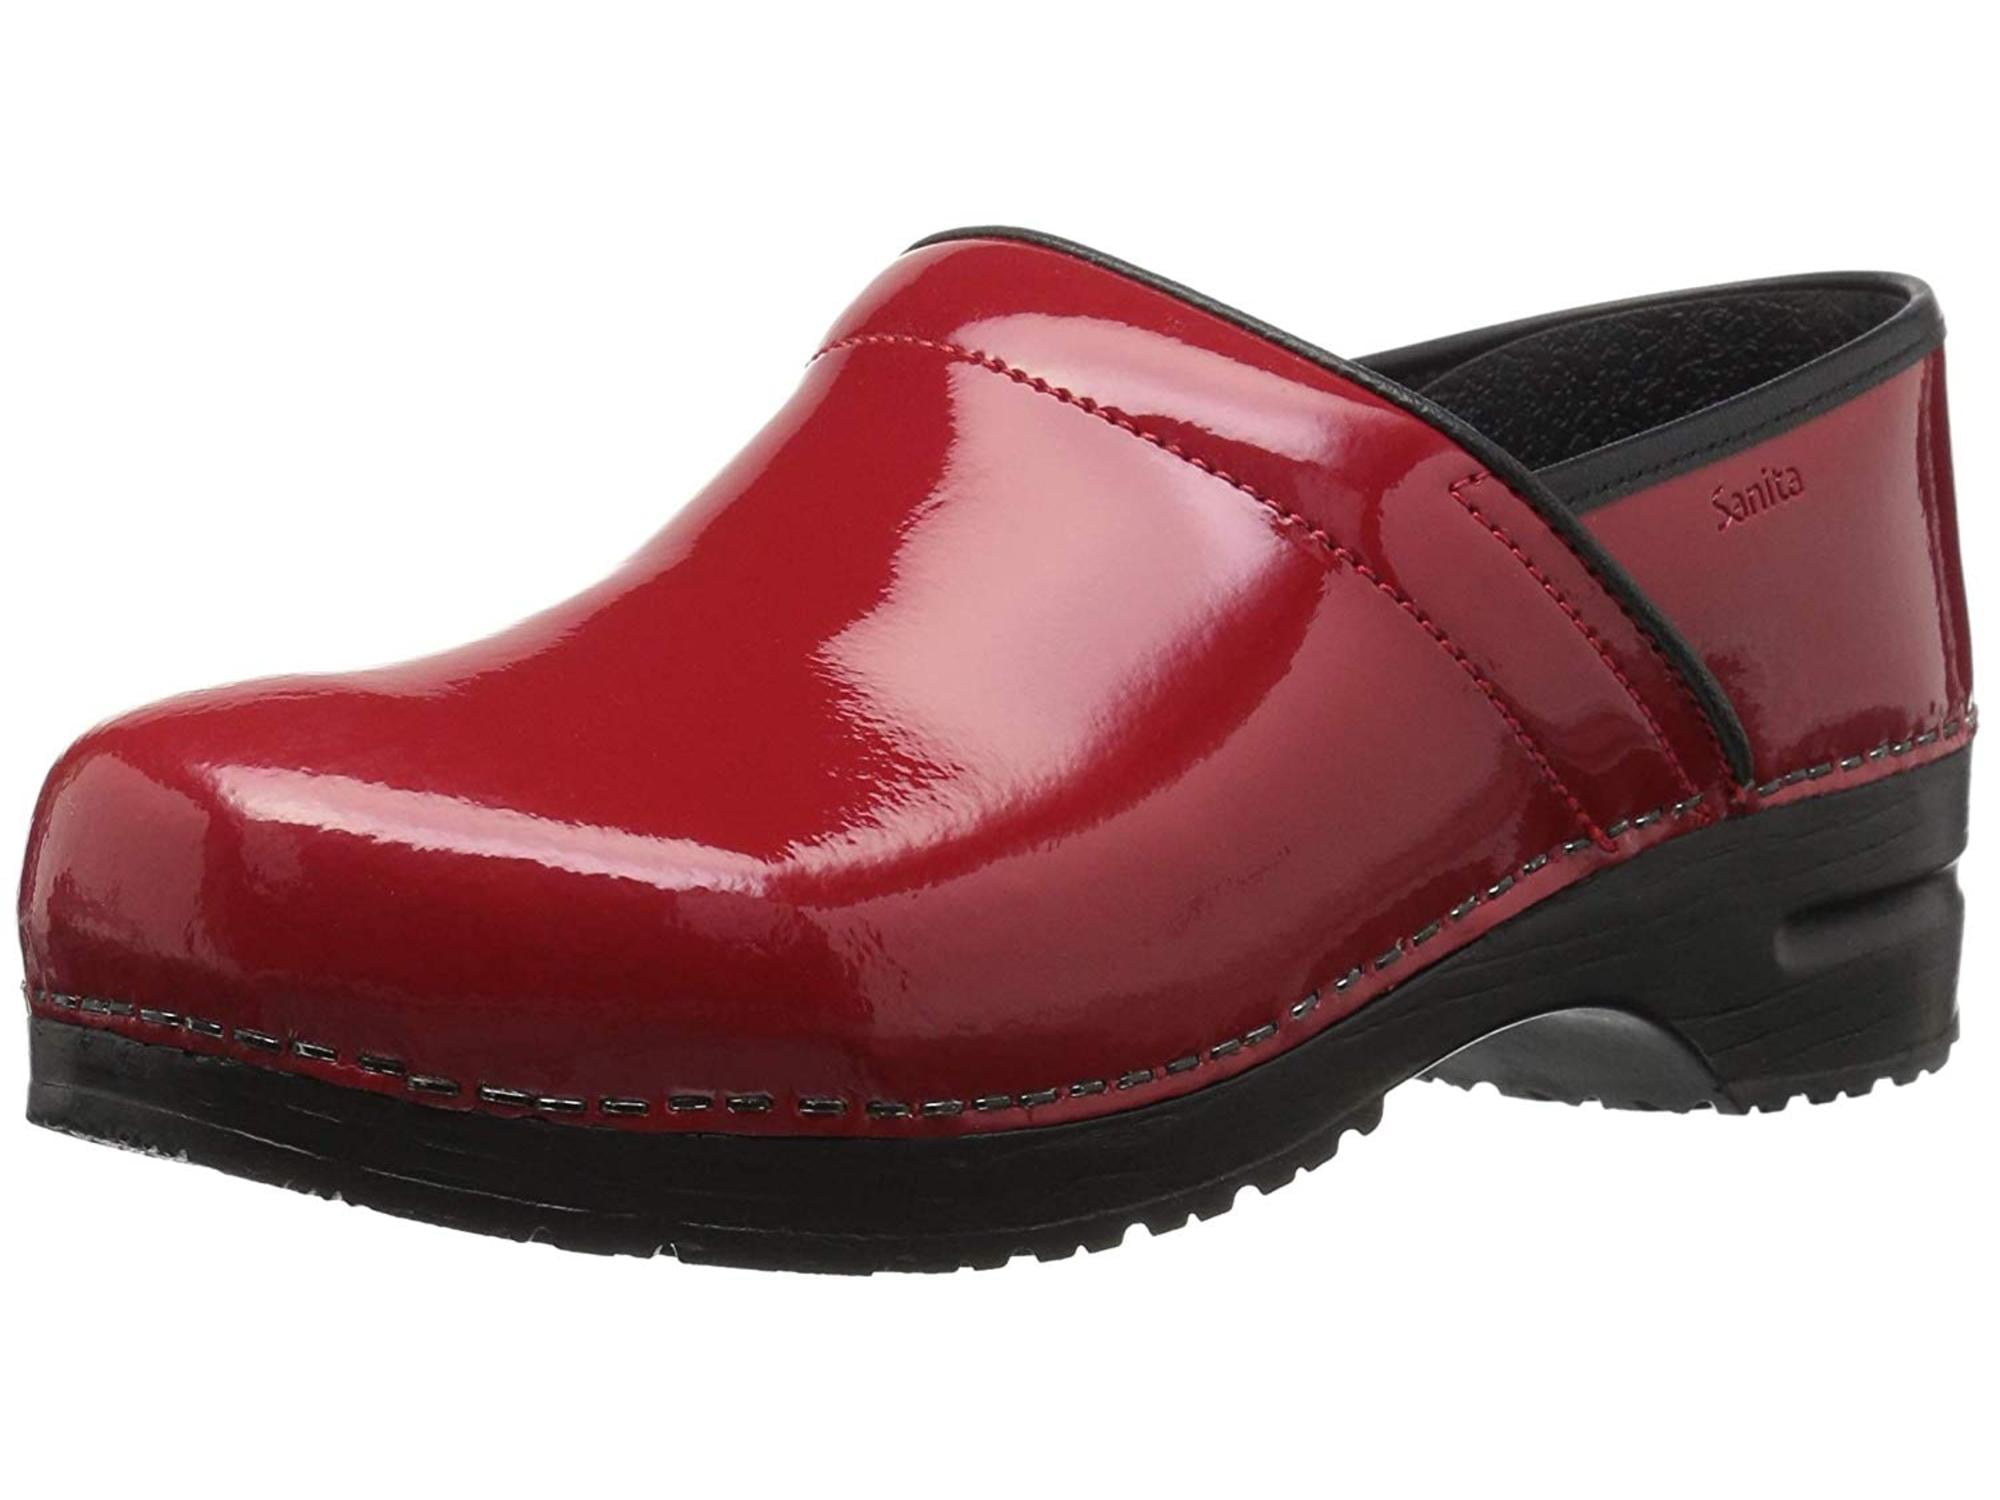 wide clogs with arch support